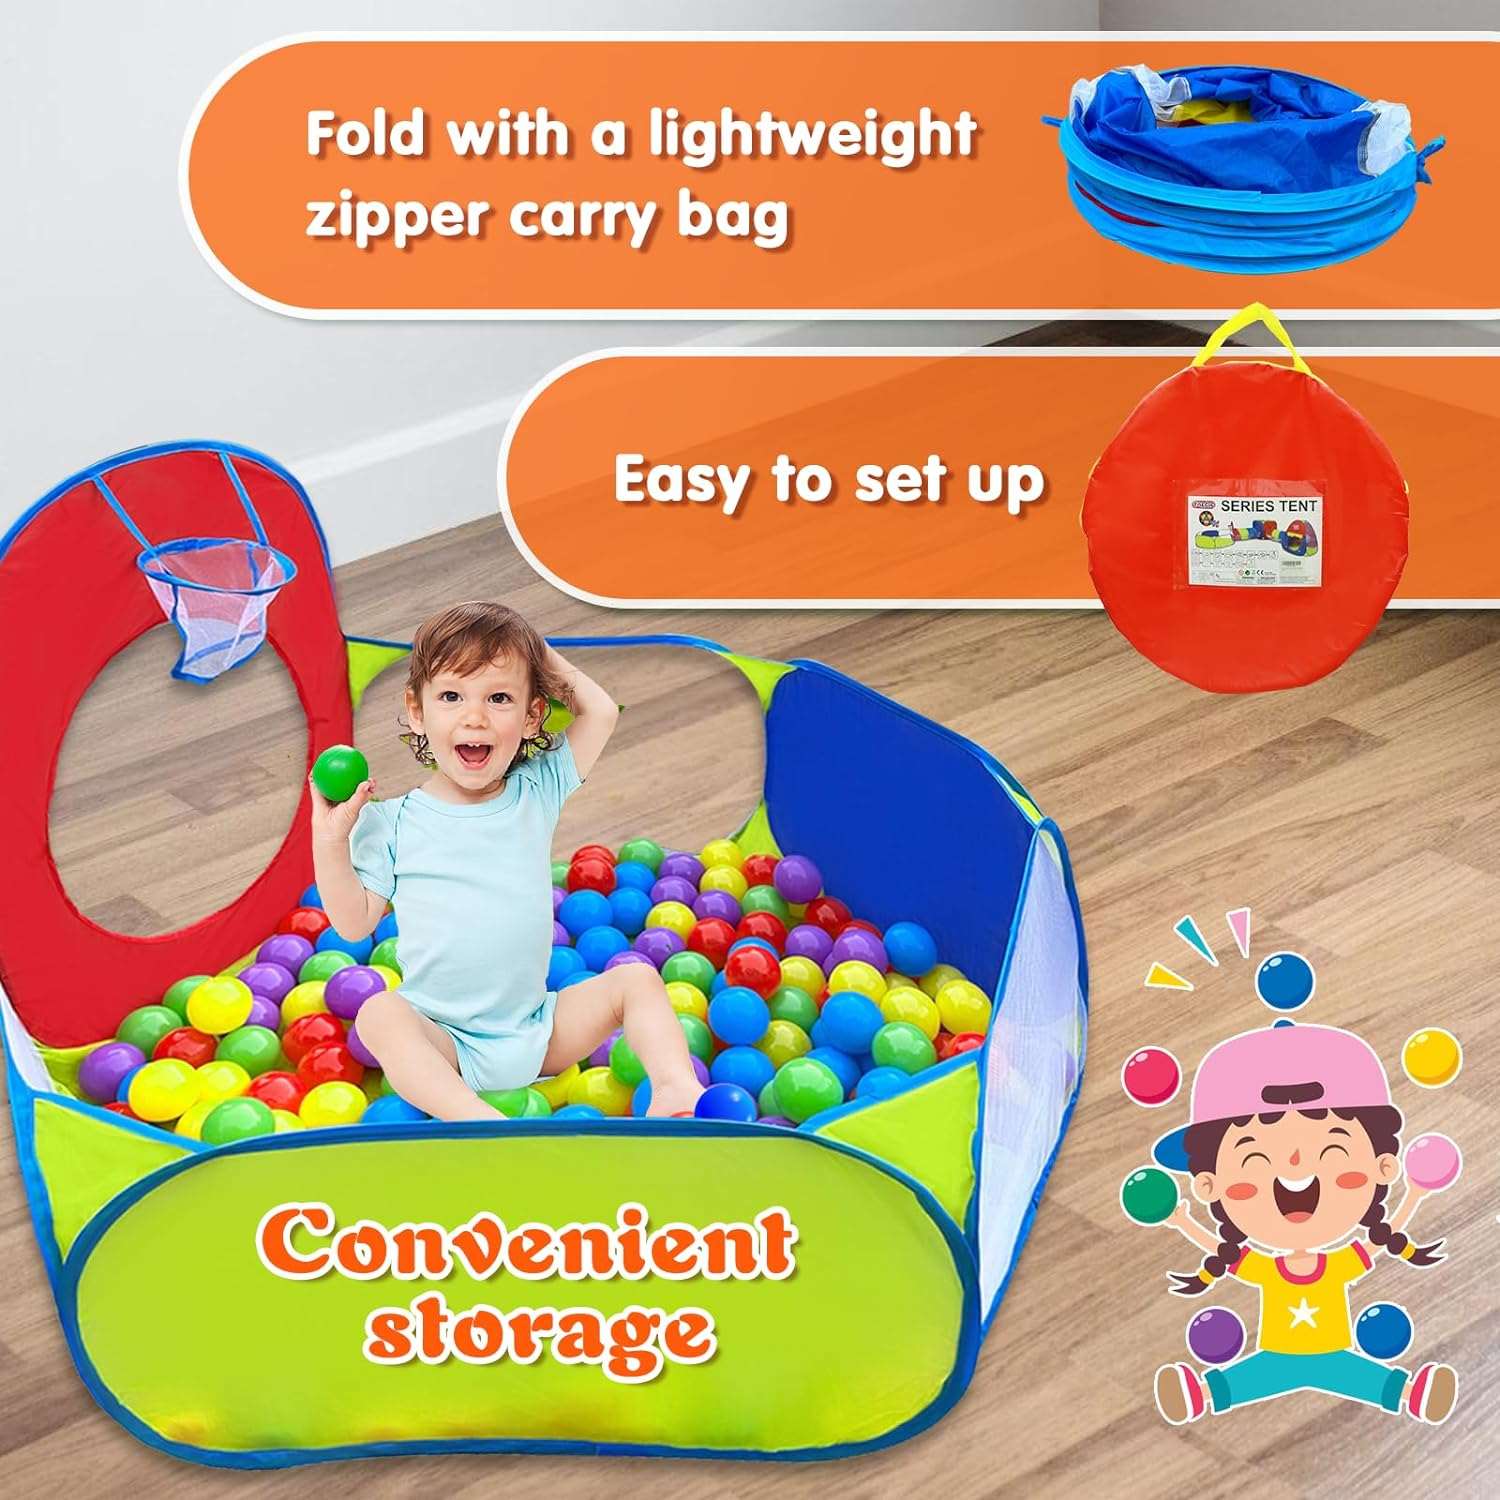 5pc Ball Pit, Play Tent and Tunnels for Kids, 1 Ball Pit, 2 Tents, 2 Crawl Tunnels, 2 Ball Hoop - Cykapu